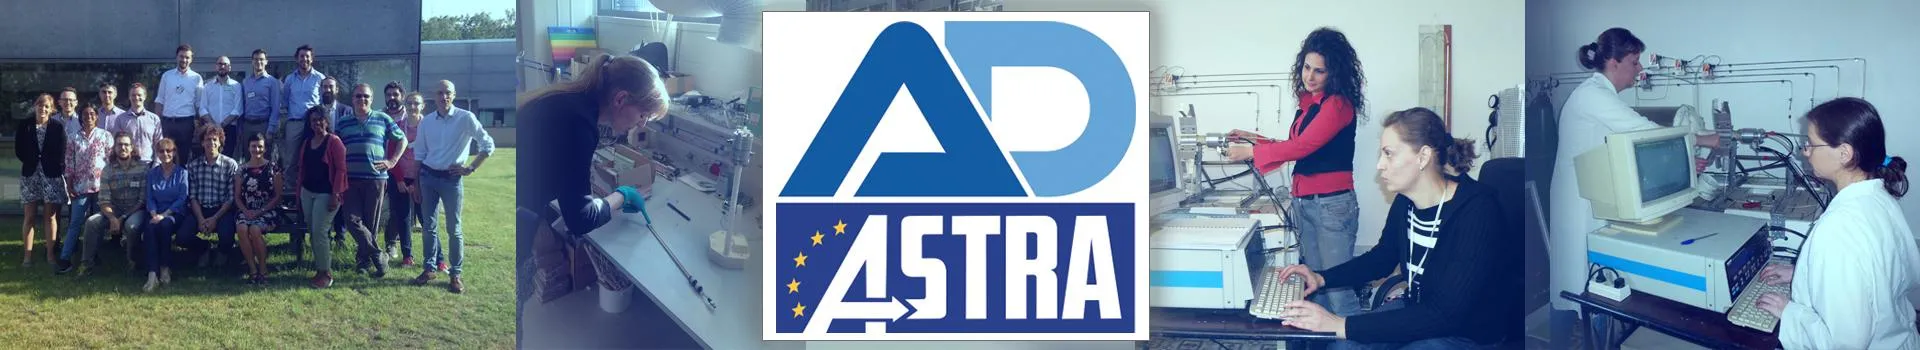 AD-ASTRA Project team and work